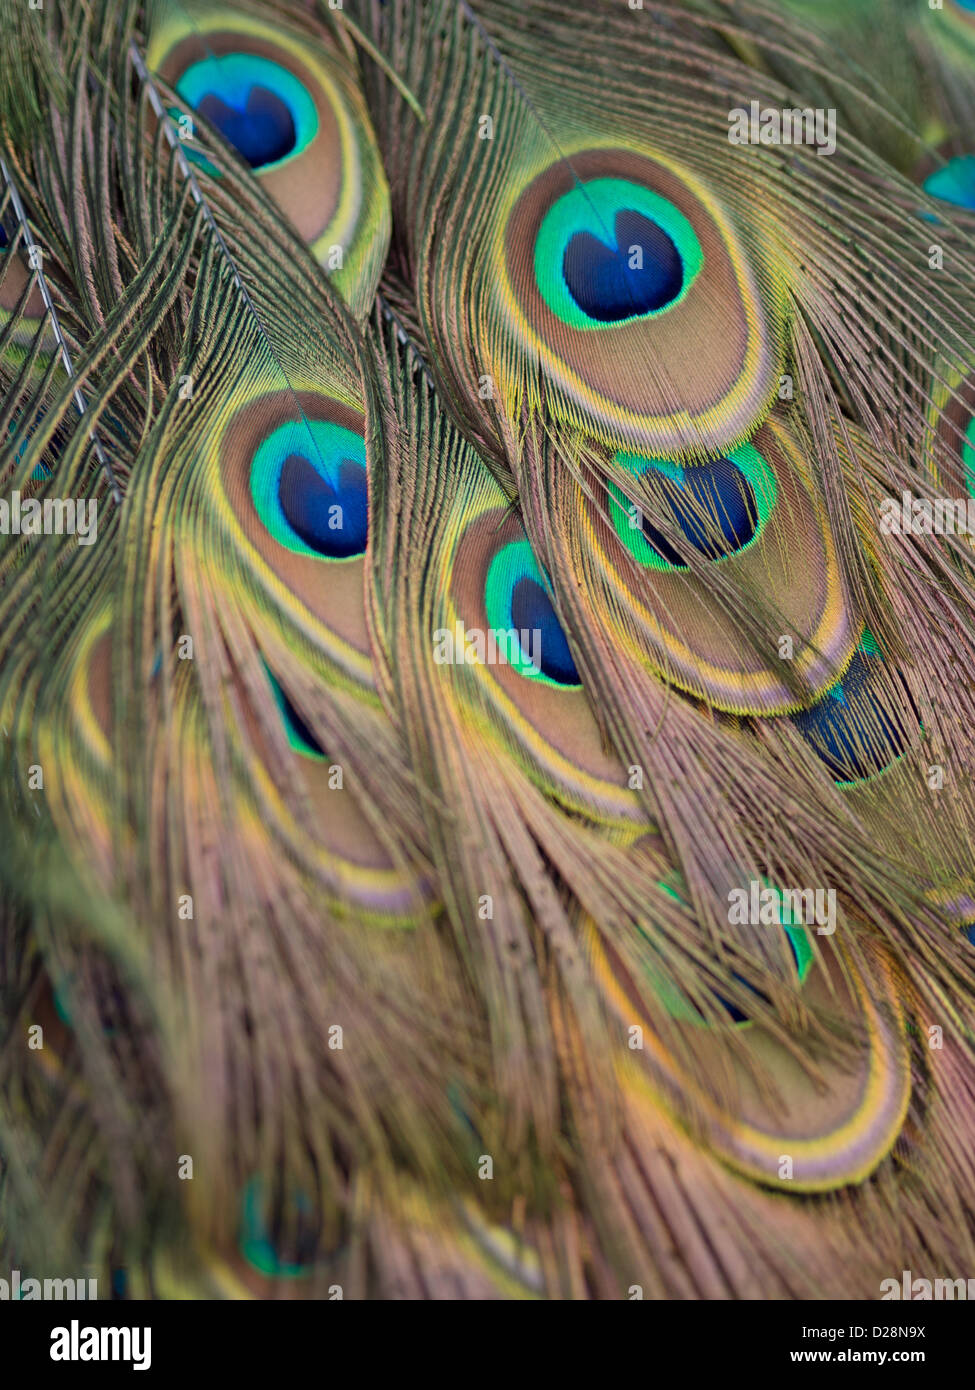 Closeup photo of colorful Peacock Feathers Stock Photo